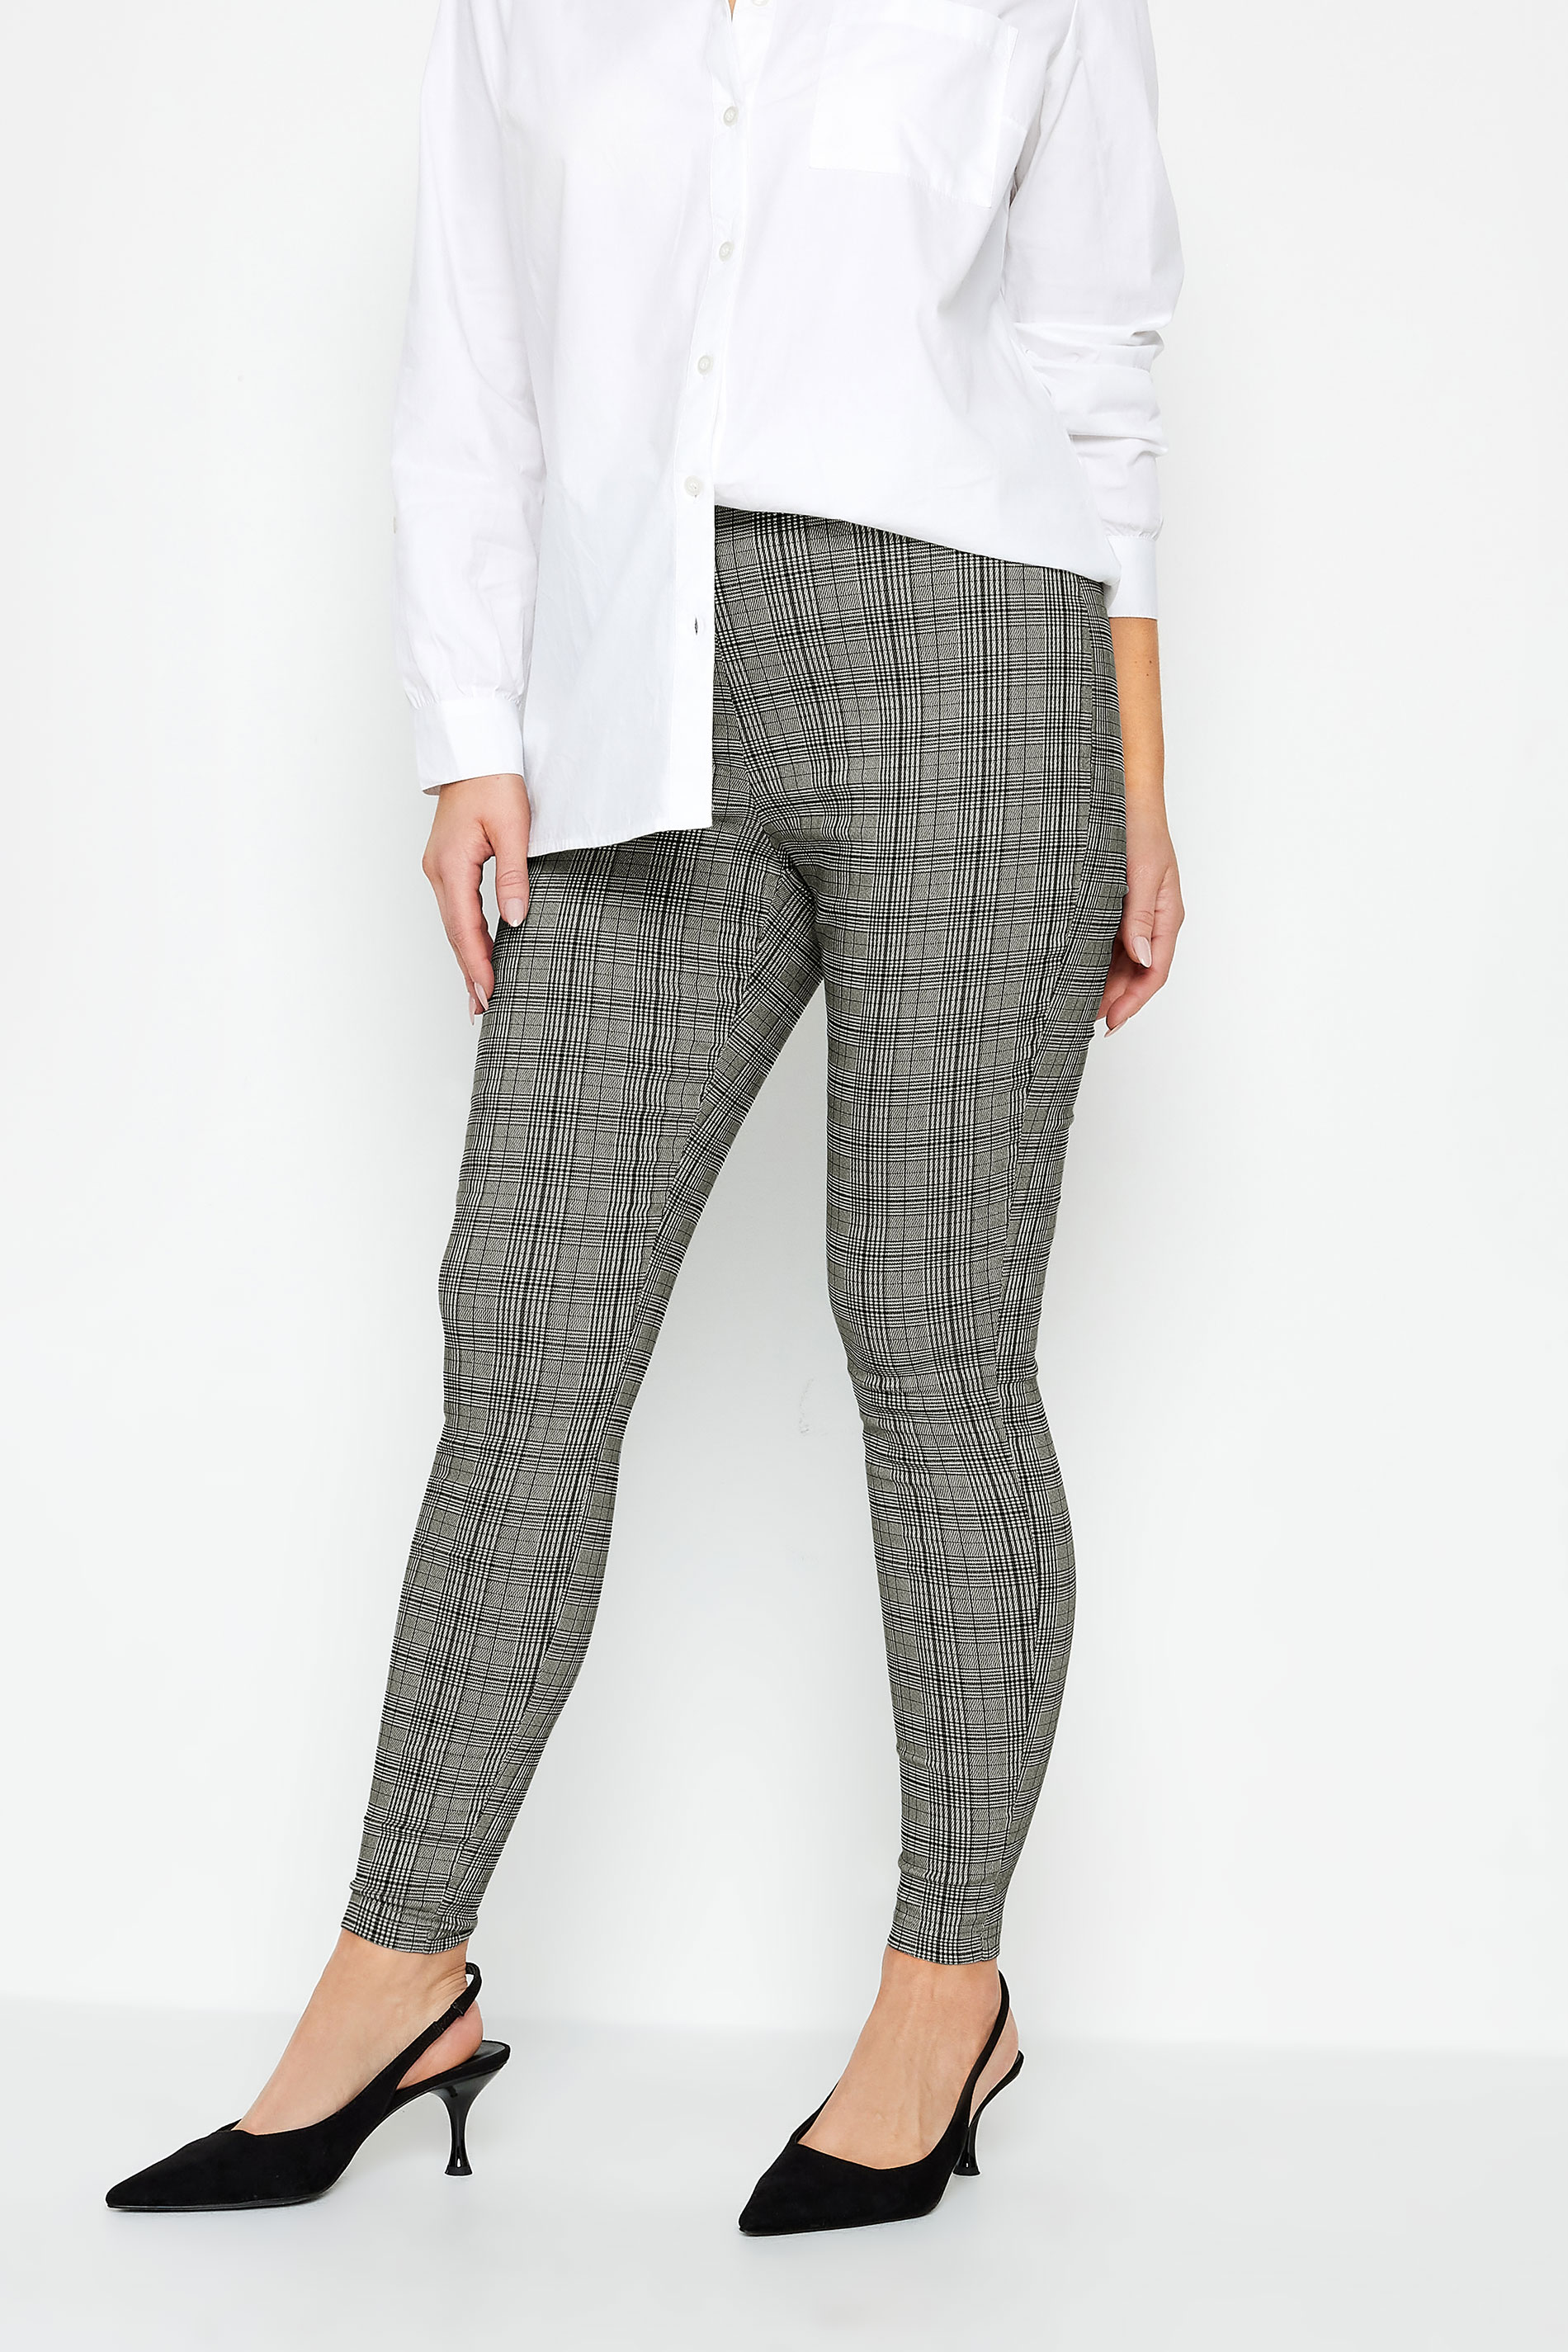 Golftini | Black Checkered Stretch Ankle Pant | Women's Golf Pant